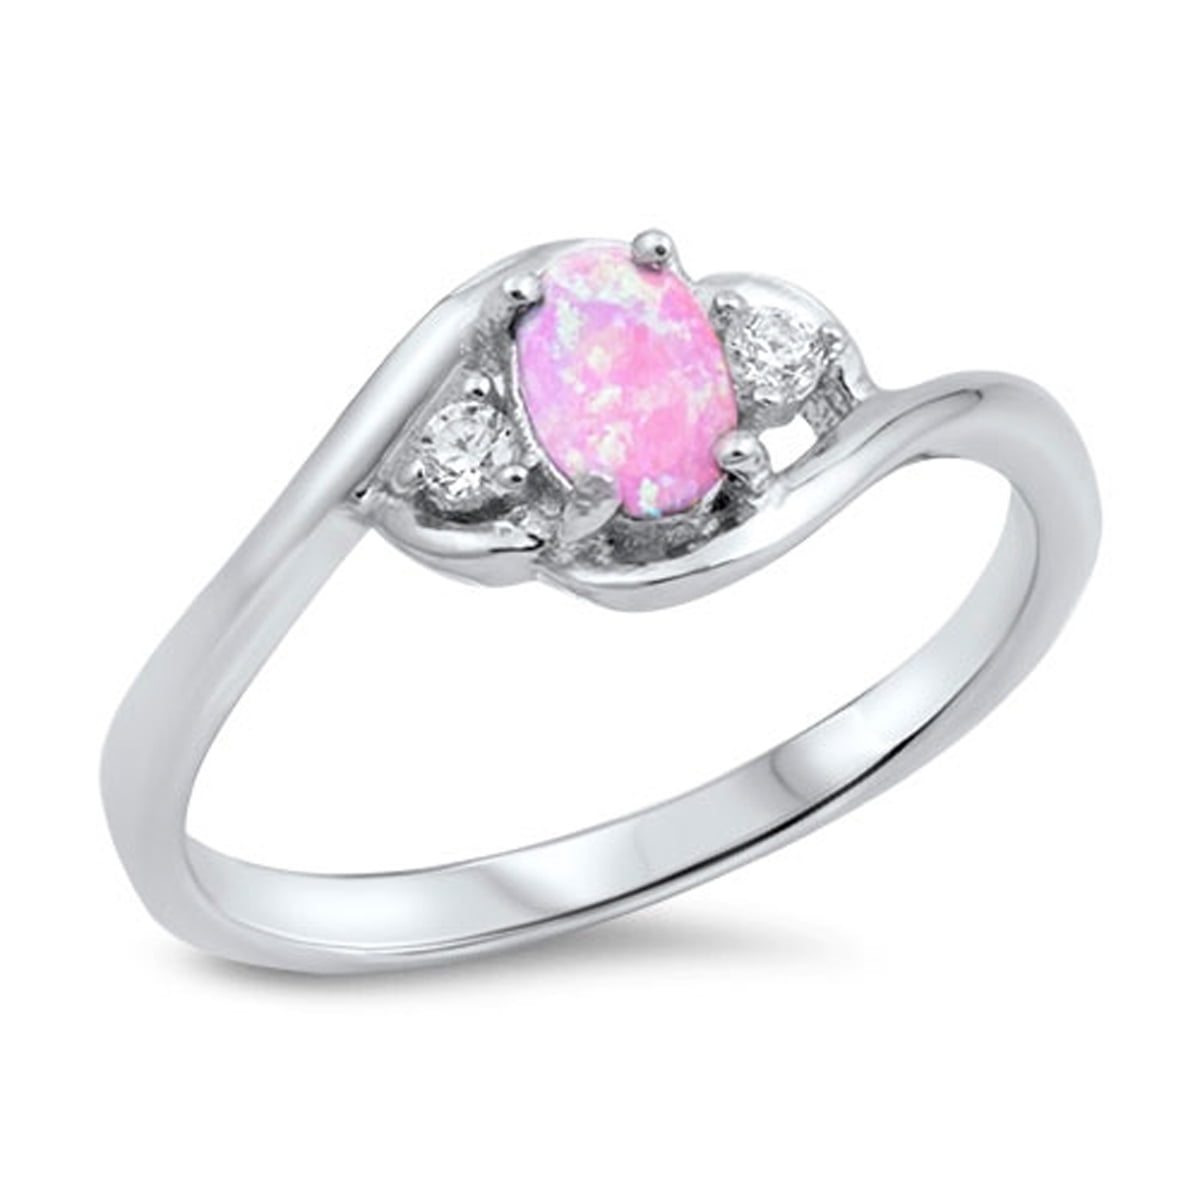 Lab created White Opal & CZ .925 Sterling Silver Ring Size 4-12 BEST SELLIING 